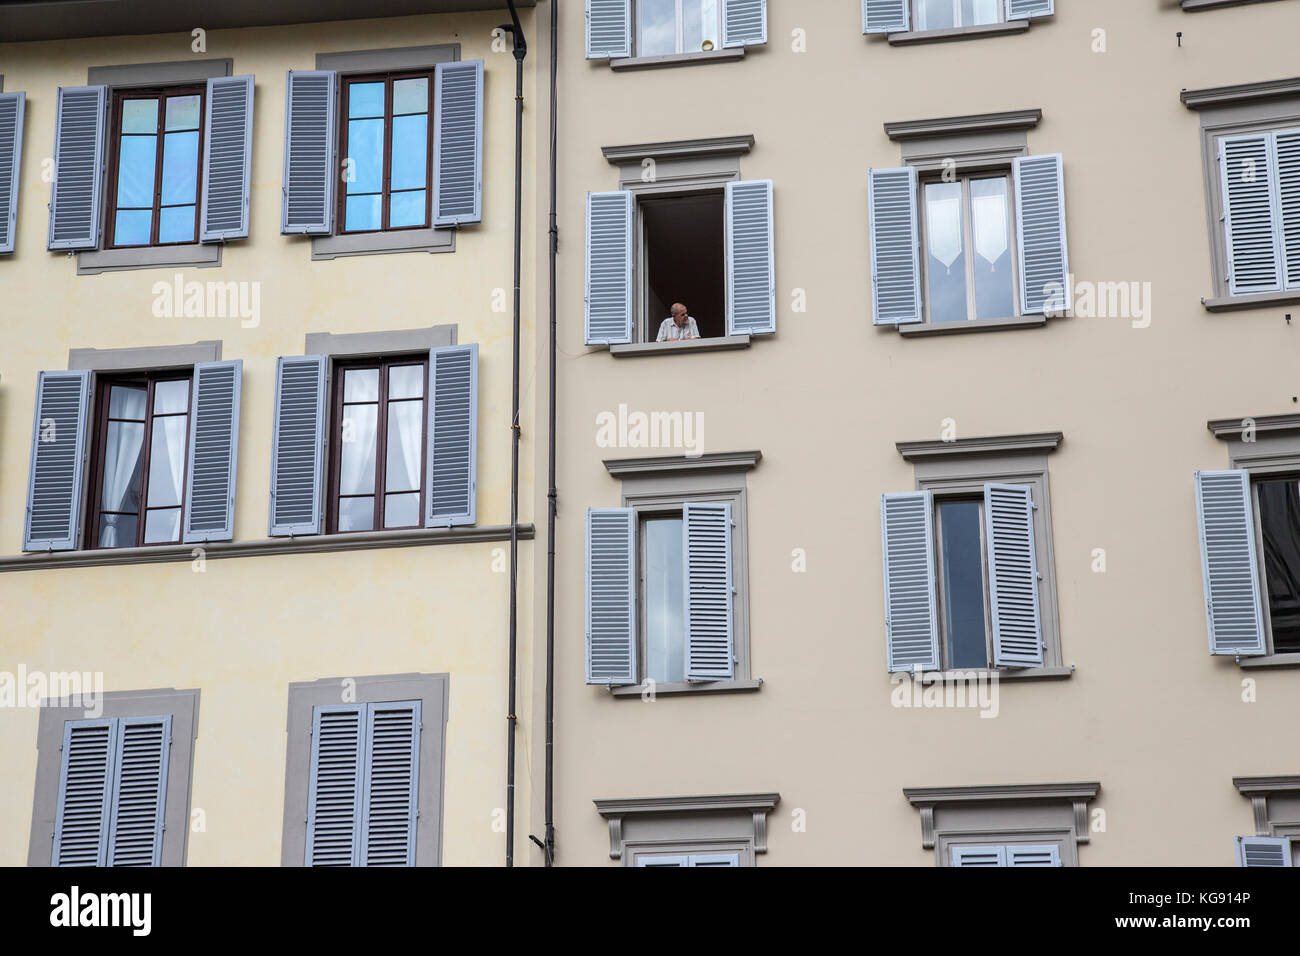 Florentine apartment scene showing louvred windows with an elderly gentleman looking out of one Stock Photo